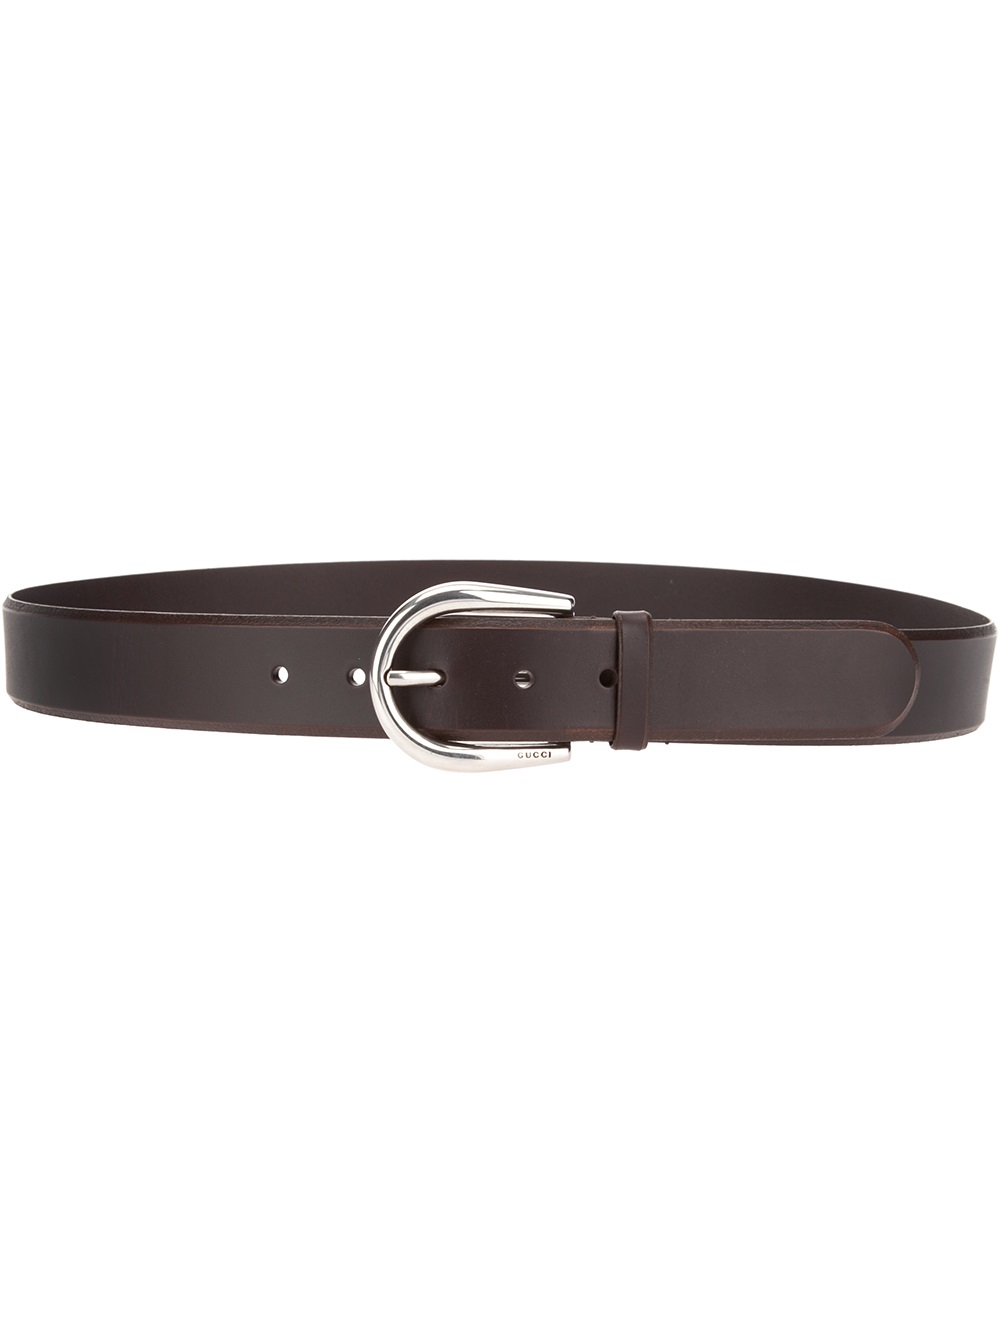 Lyst - Gucci Bridle Buckle Belt in Brown for Men